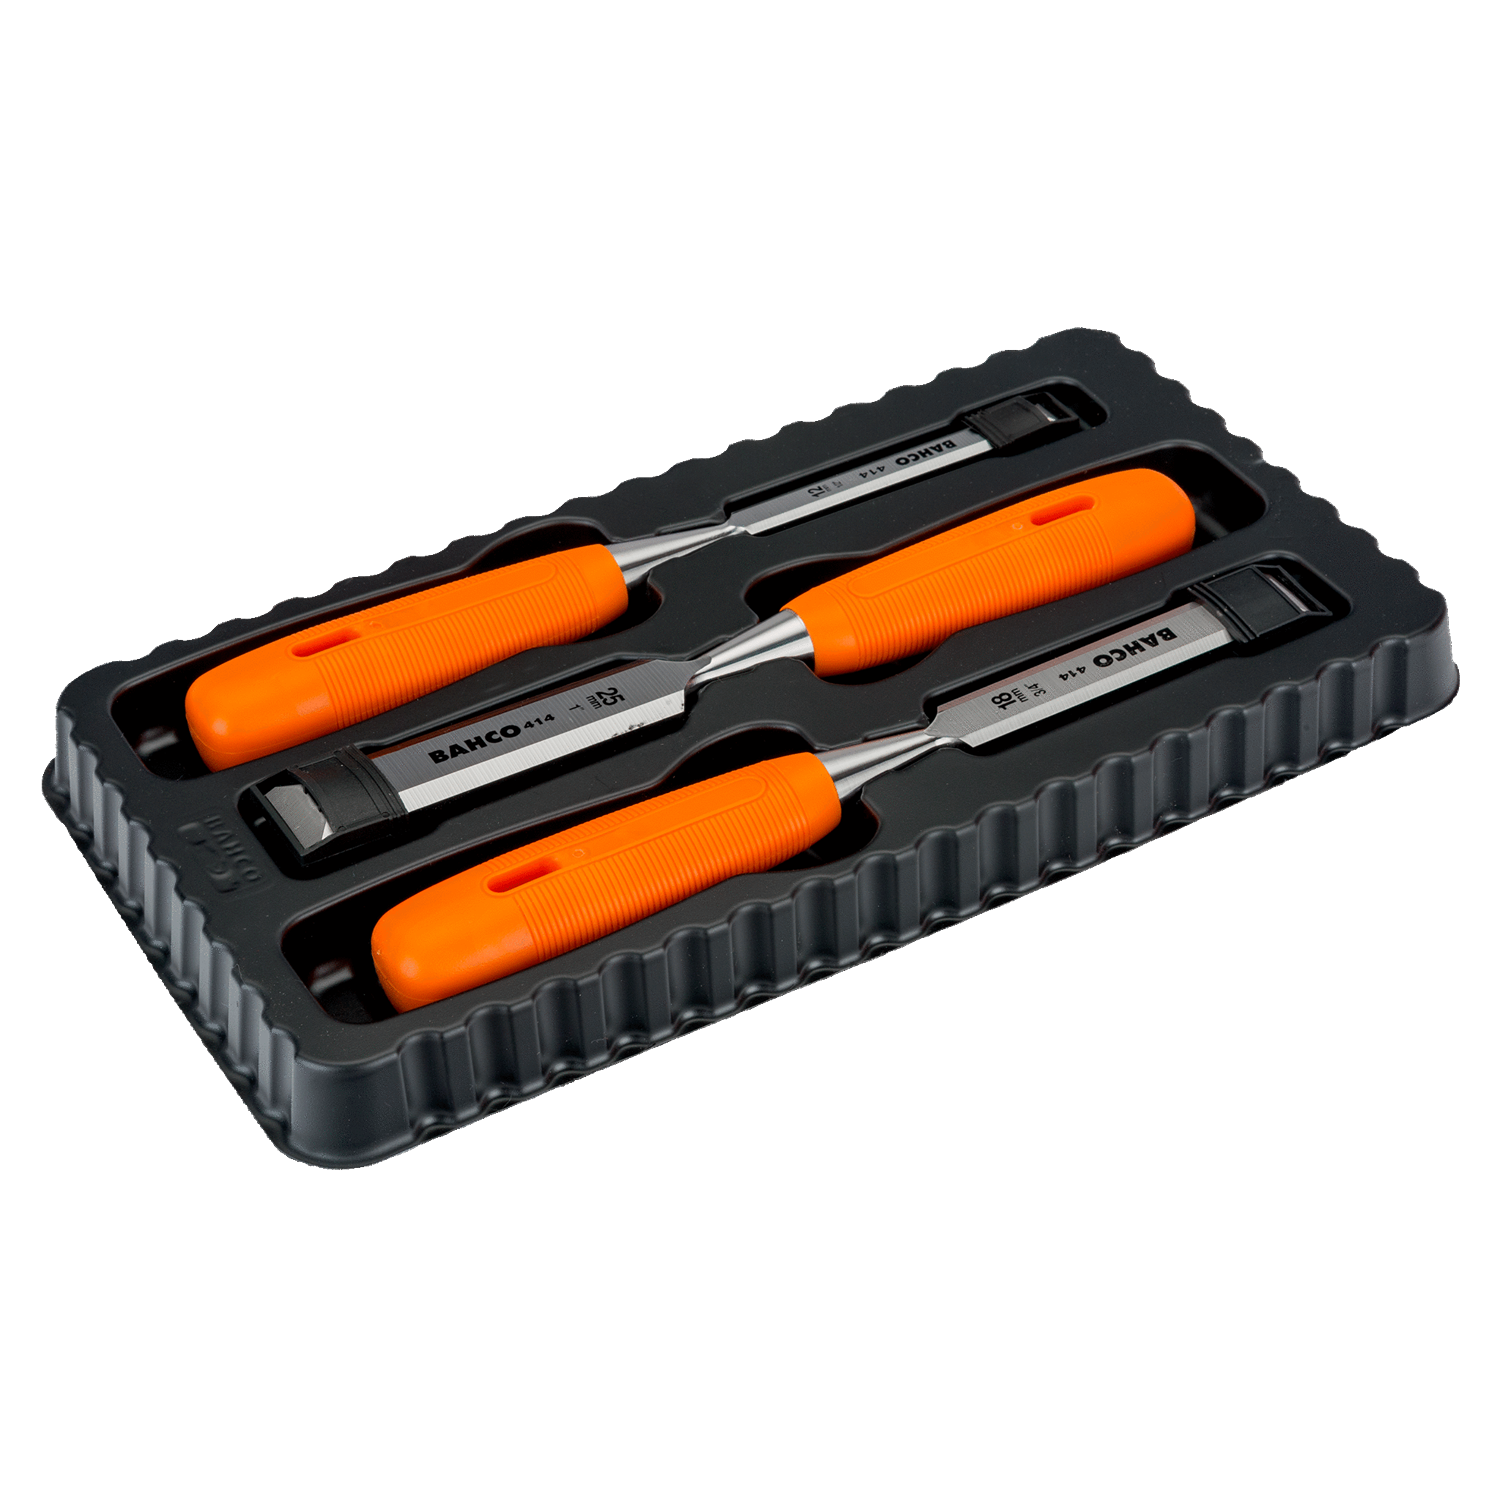 BAHCO 414-S3-EUR Chisel Set with Polypropylene Handle - 3 Pcs - Premium Chisel Set from BAHCO - Shop now at Yew Aik.